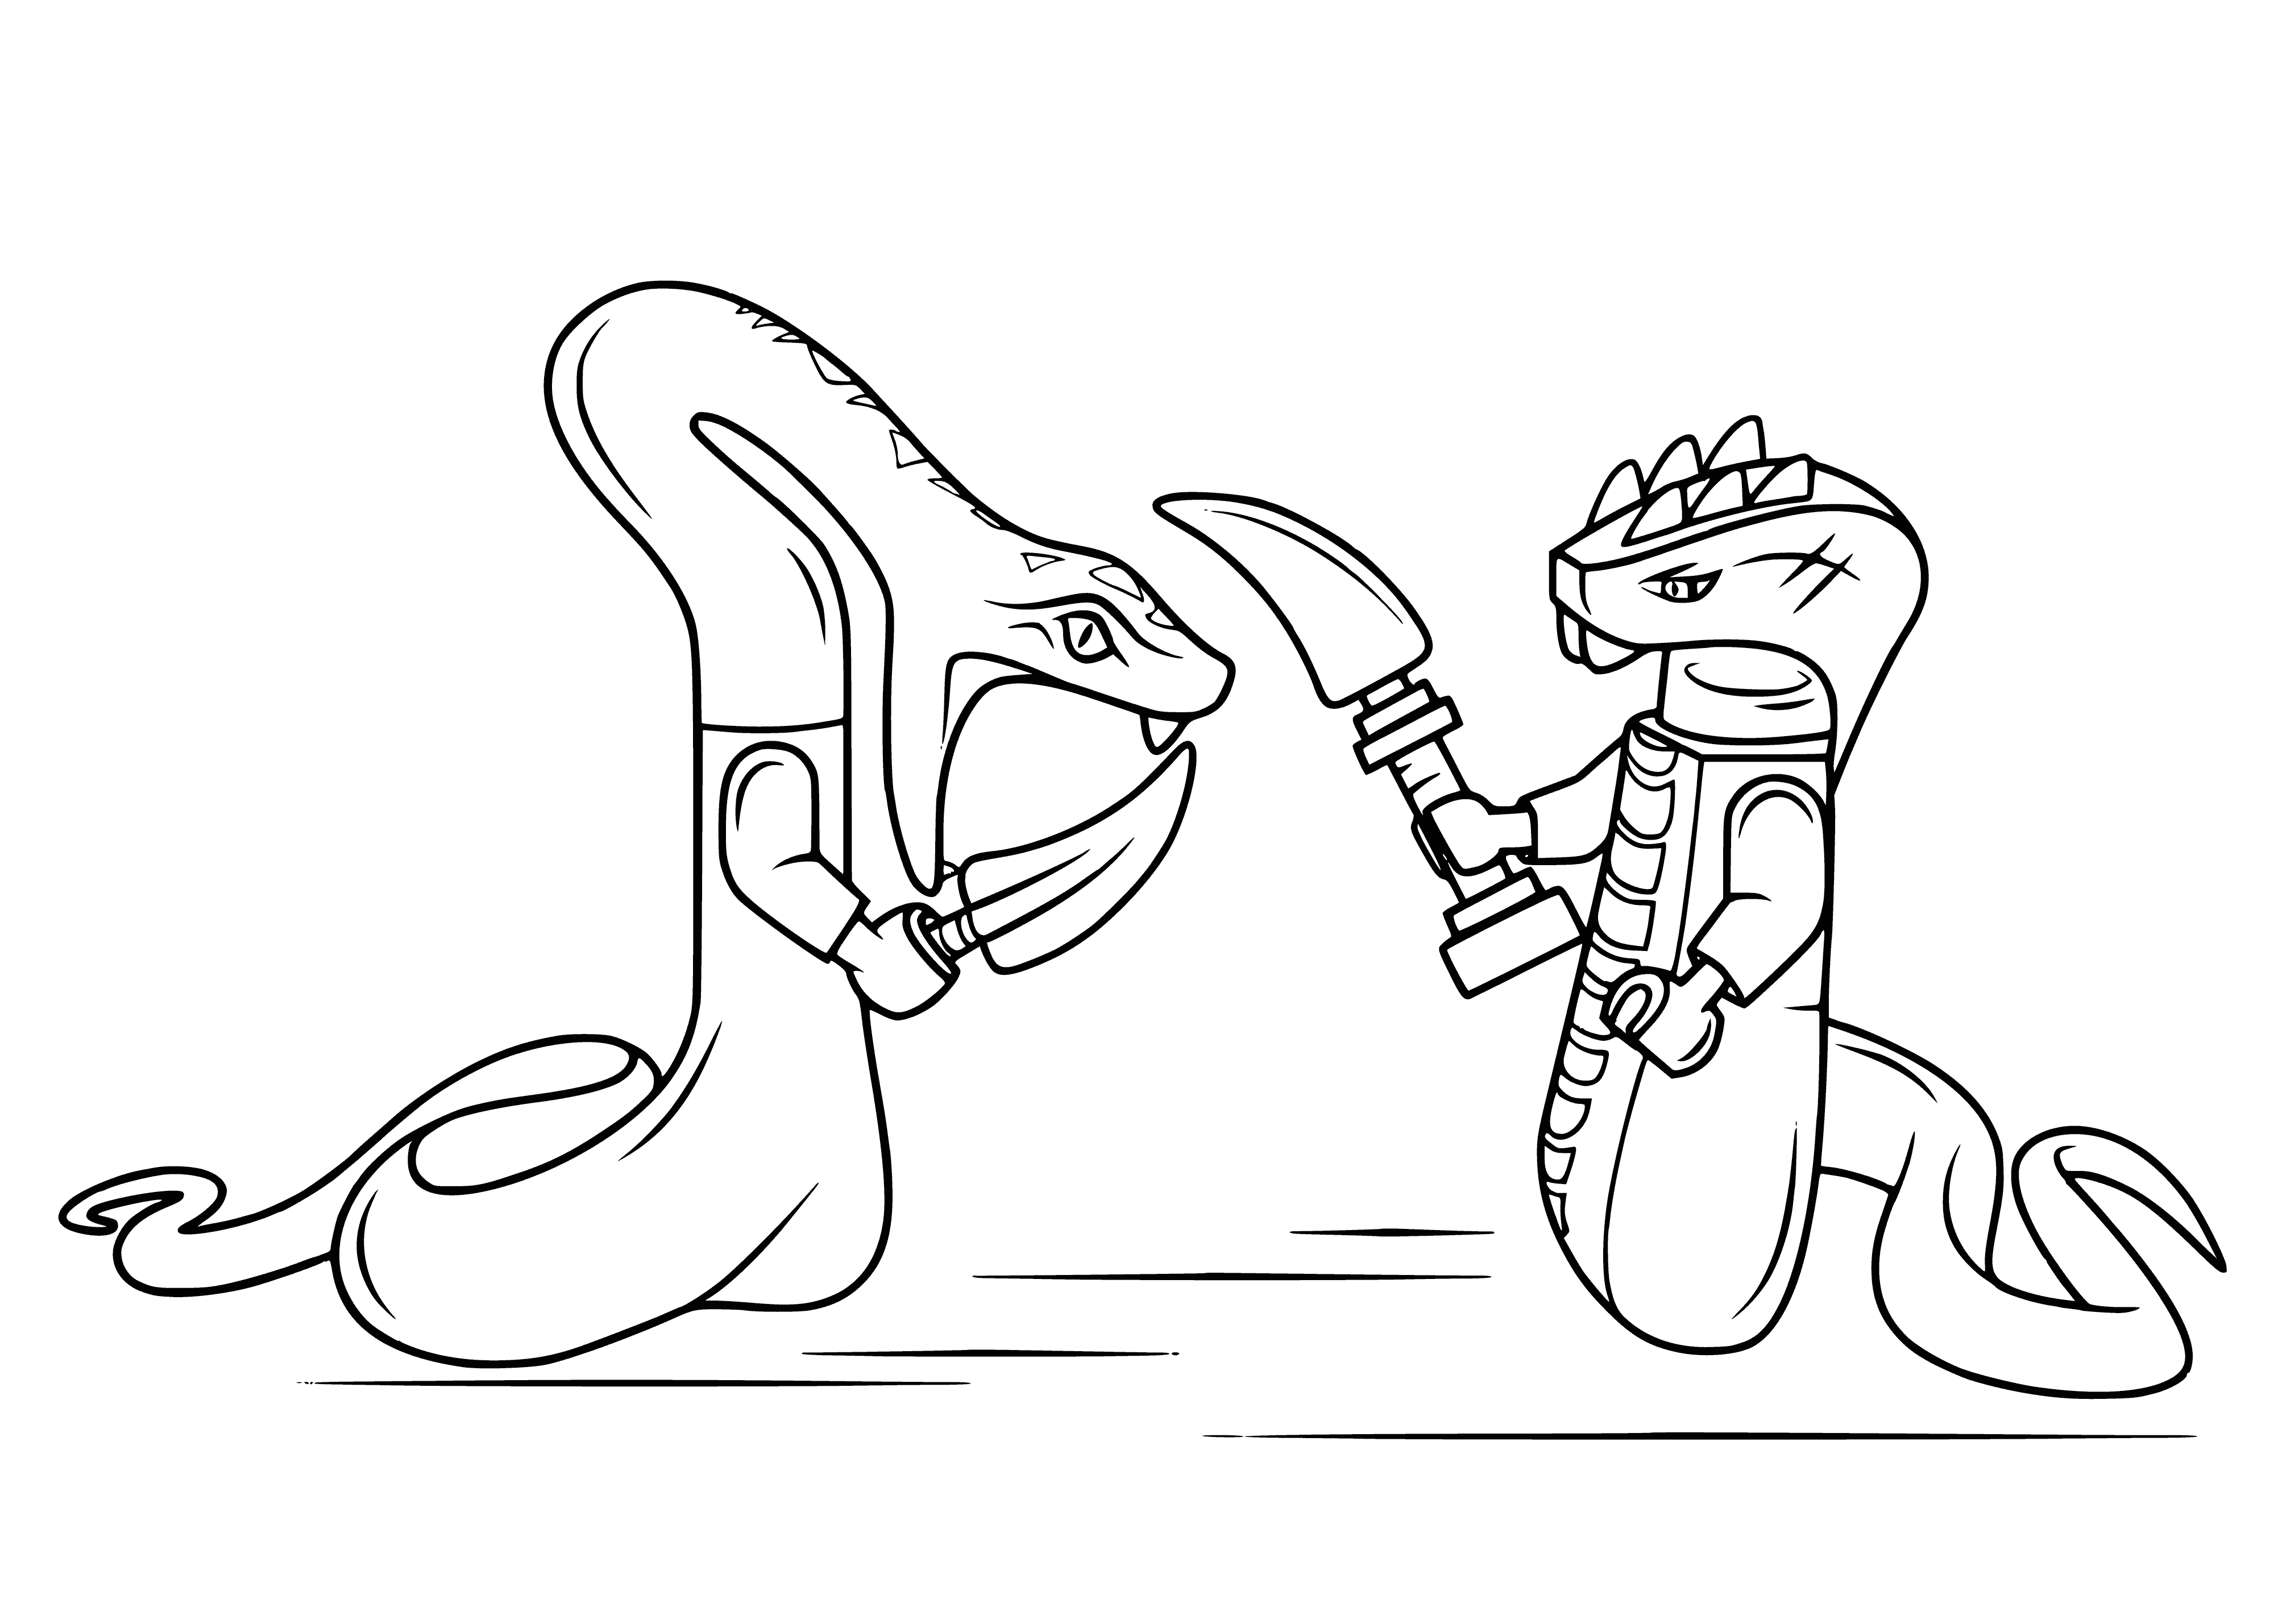 coloring page: Four snakes in coiled positions with yellow & white eyes: two green & two brown. #coloringbook #animals